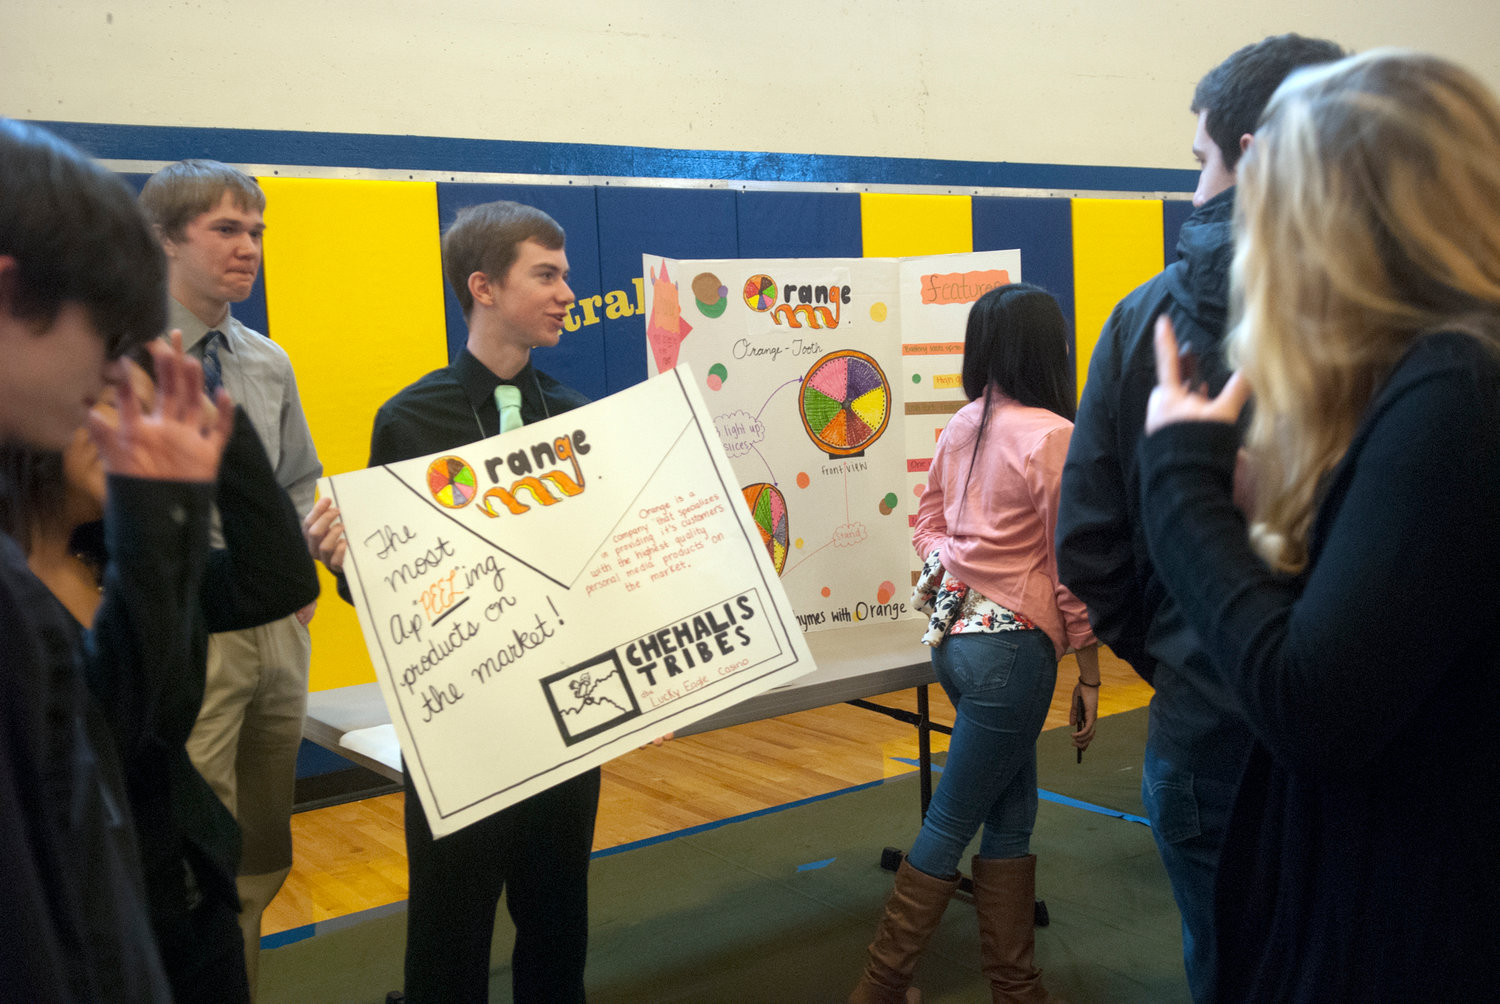 Colton Pruitt, of W.F. West, holds a sign advertising his company’s product, an “Orange-Tooth” speaker, during the trade show portion of Washington Business Week Thursday. More than 400 juniors from Centralia and W.F. West high schools participated in the annual four-day event.